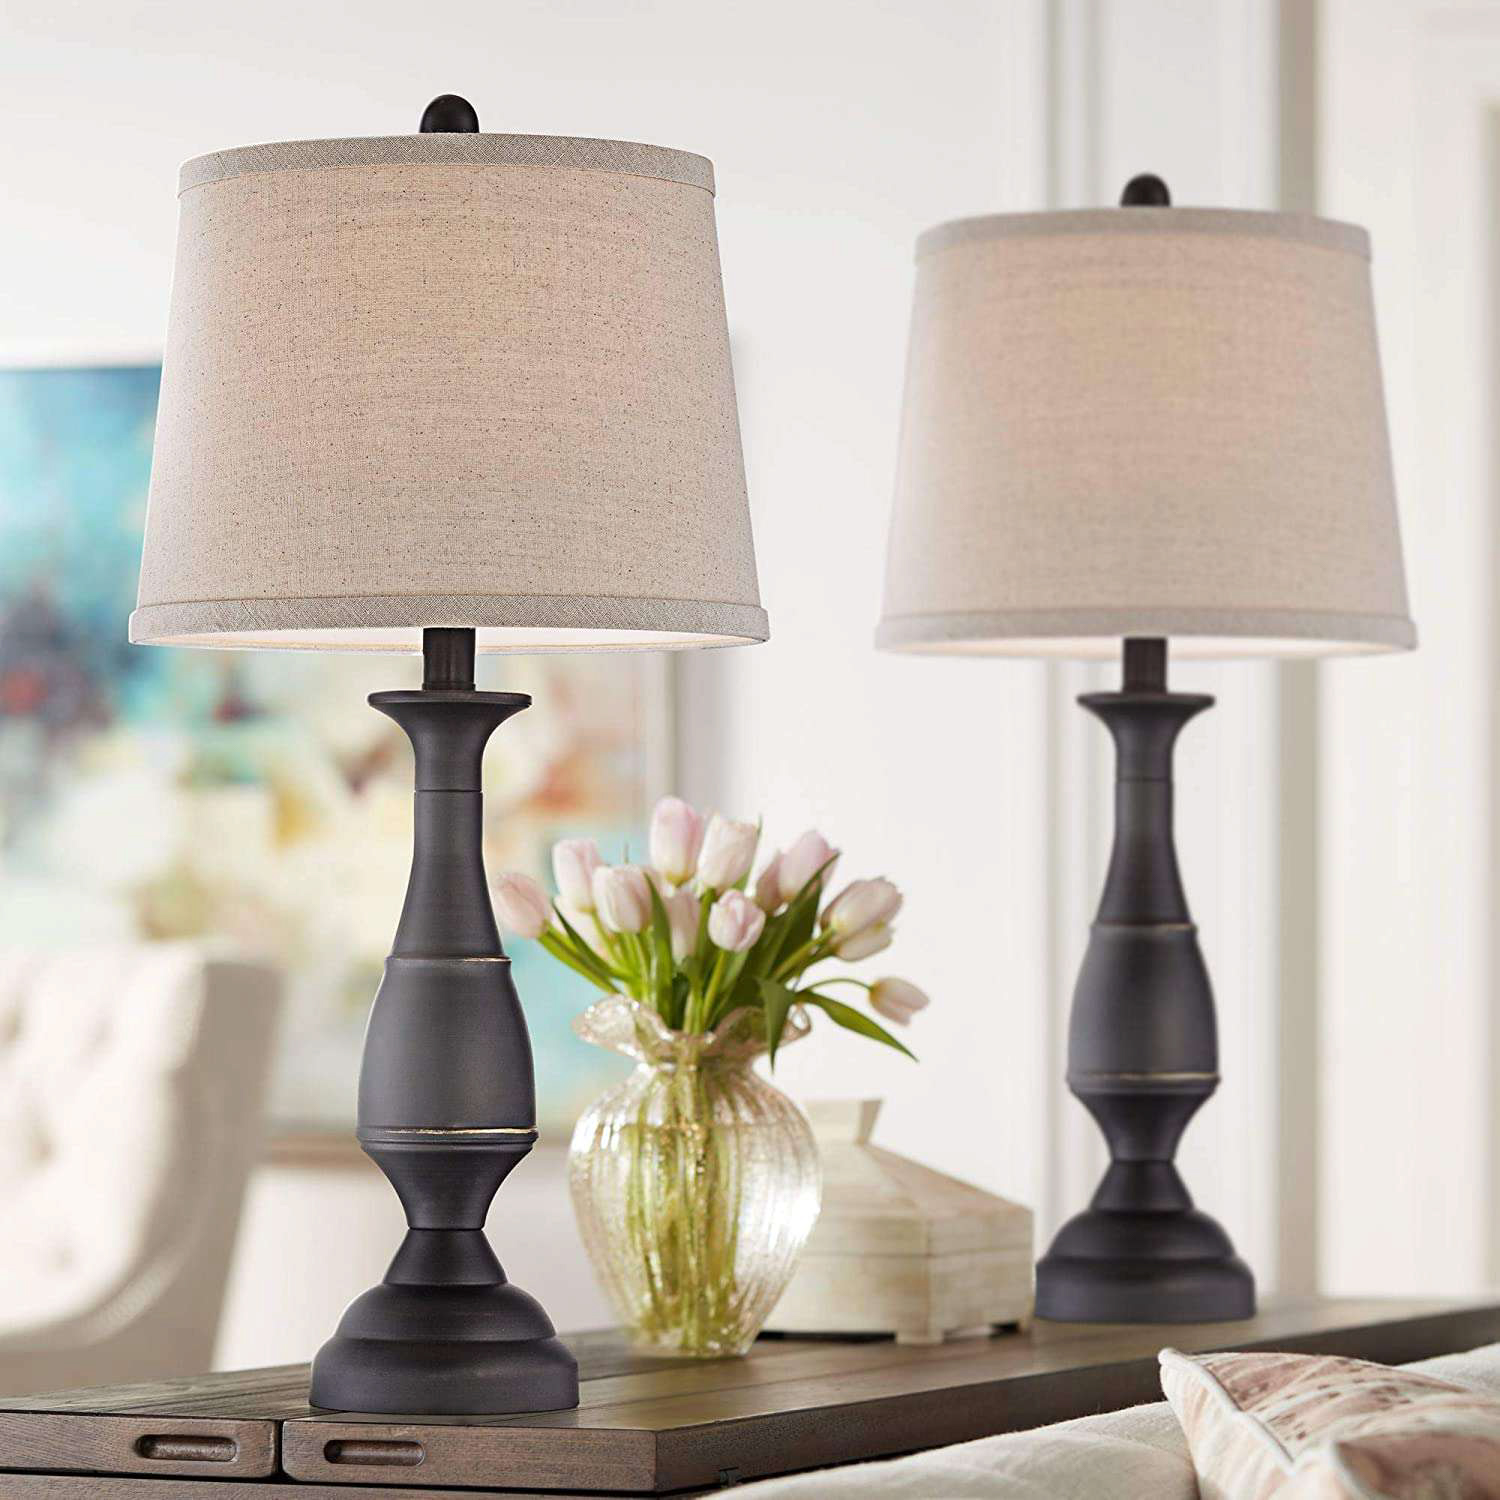 Shining in Simplicity: The Charm of Clam Shell Light Shades